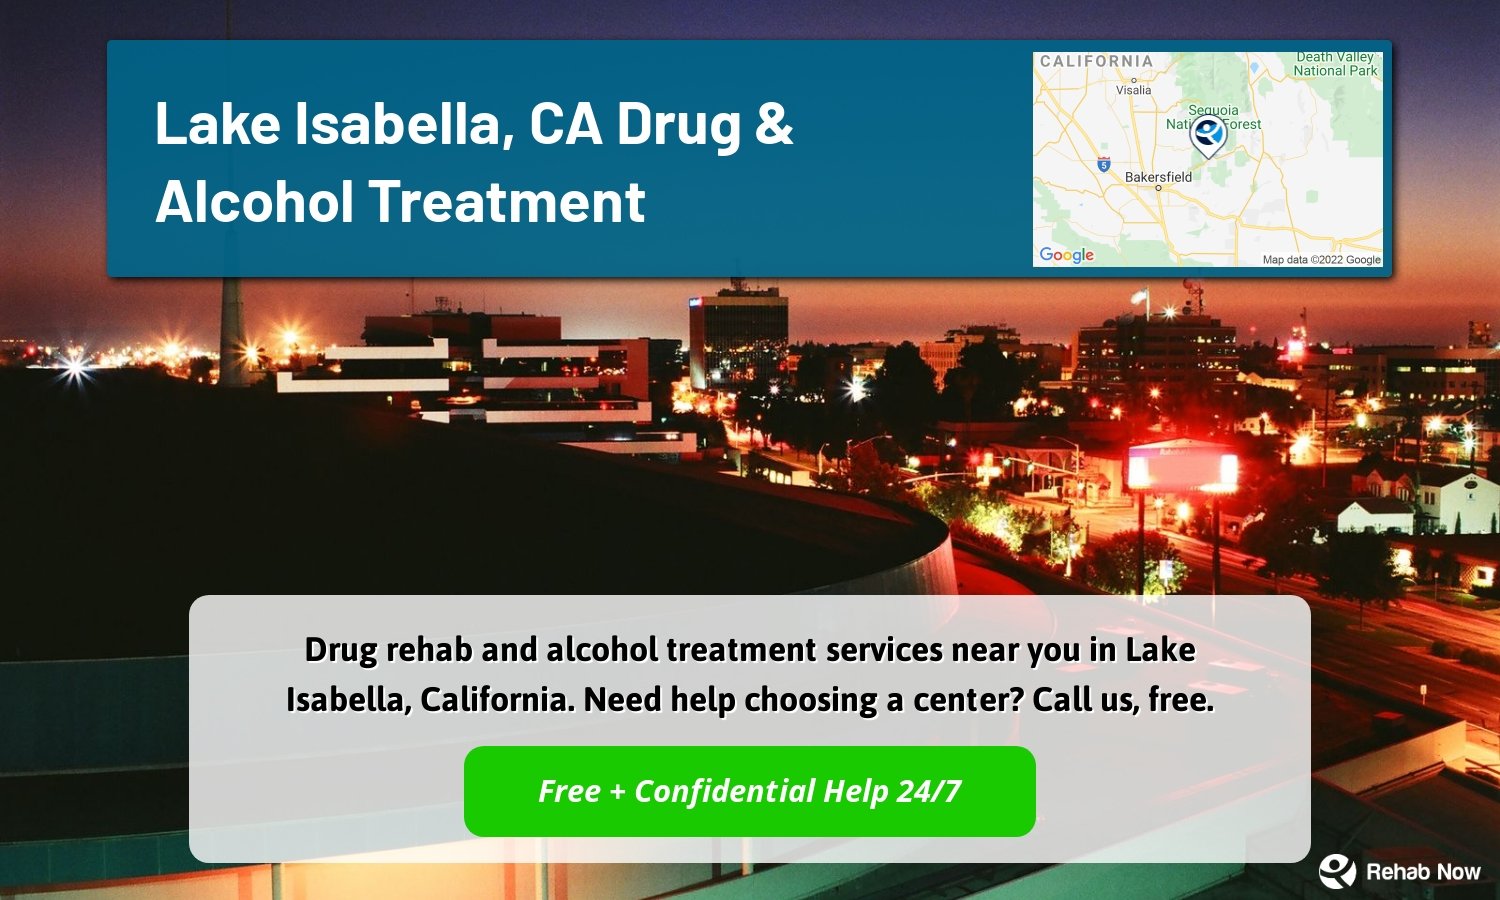 Drug rehab and alcohol treatment services near you in Lake Isabella, California. Need help choosing a center? Call us, free.